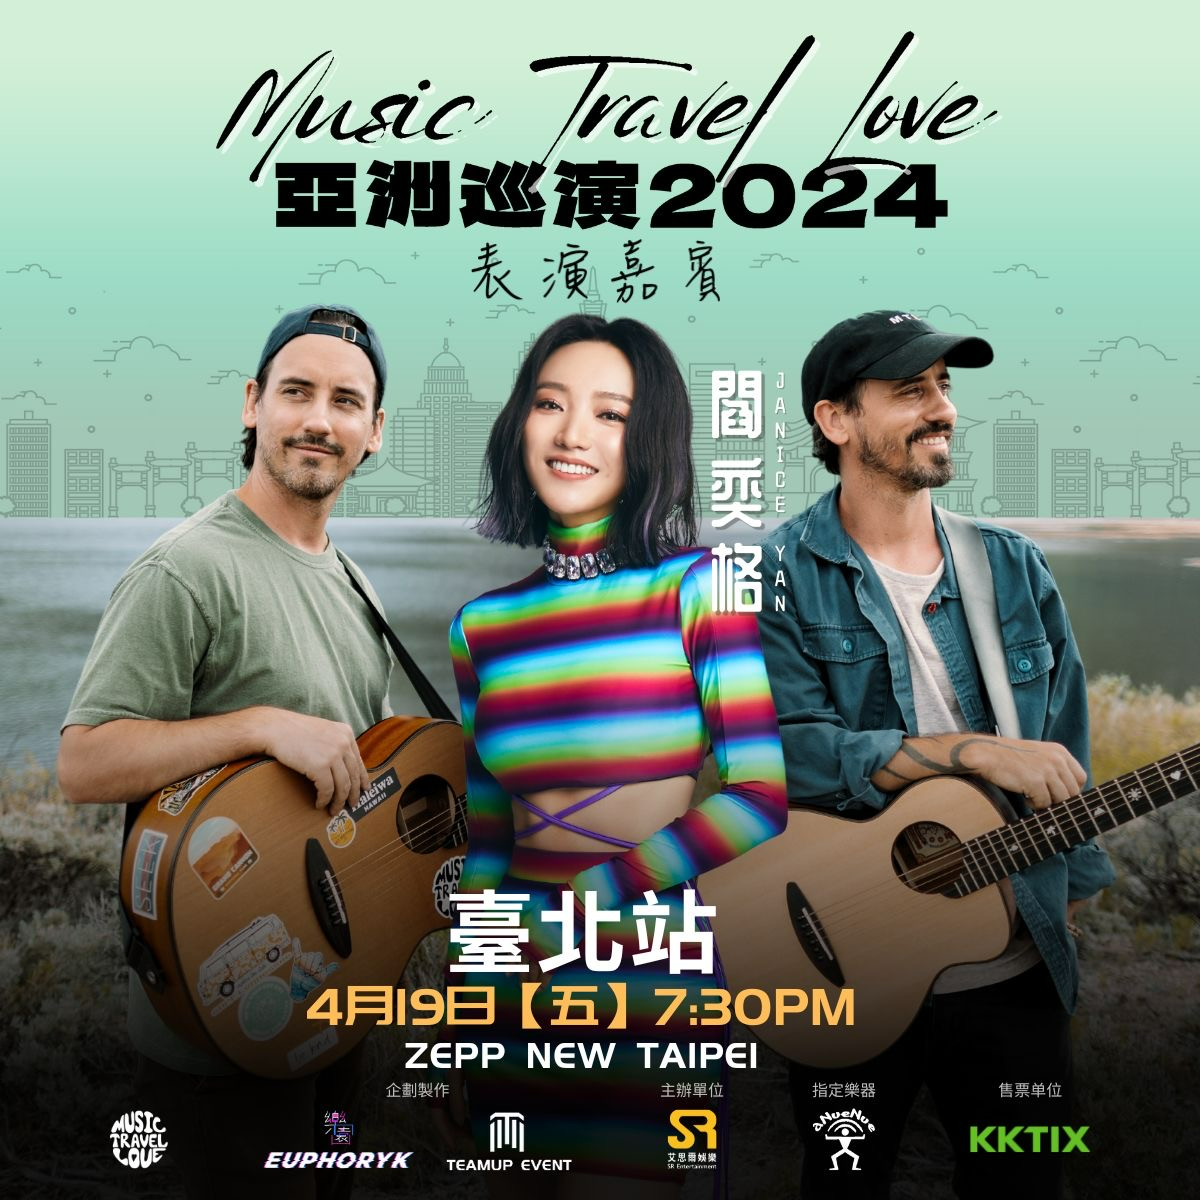 Music Travel Love│Music Travel Love 《Covering The World》 Feat. Dave Moffatt Asia Tour 2024 台北場